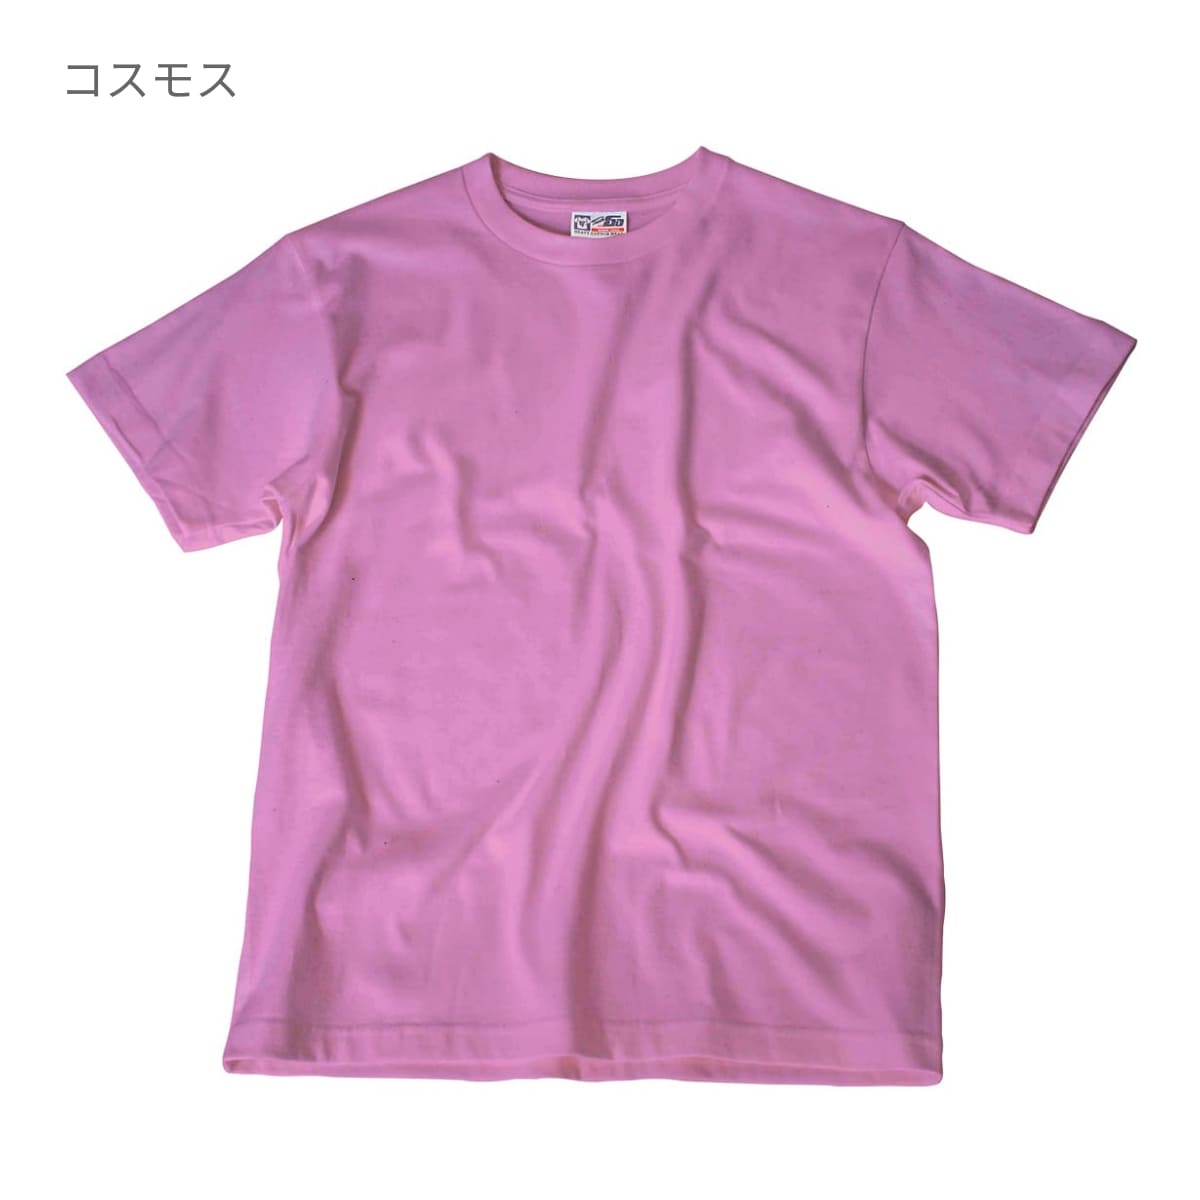 Touch and Go Ｔシャツ | ビッグサイズ | 1枚 | SS1030 | カフェオーレ